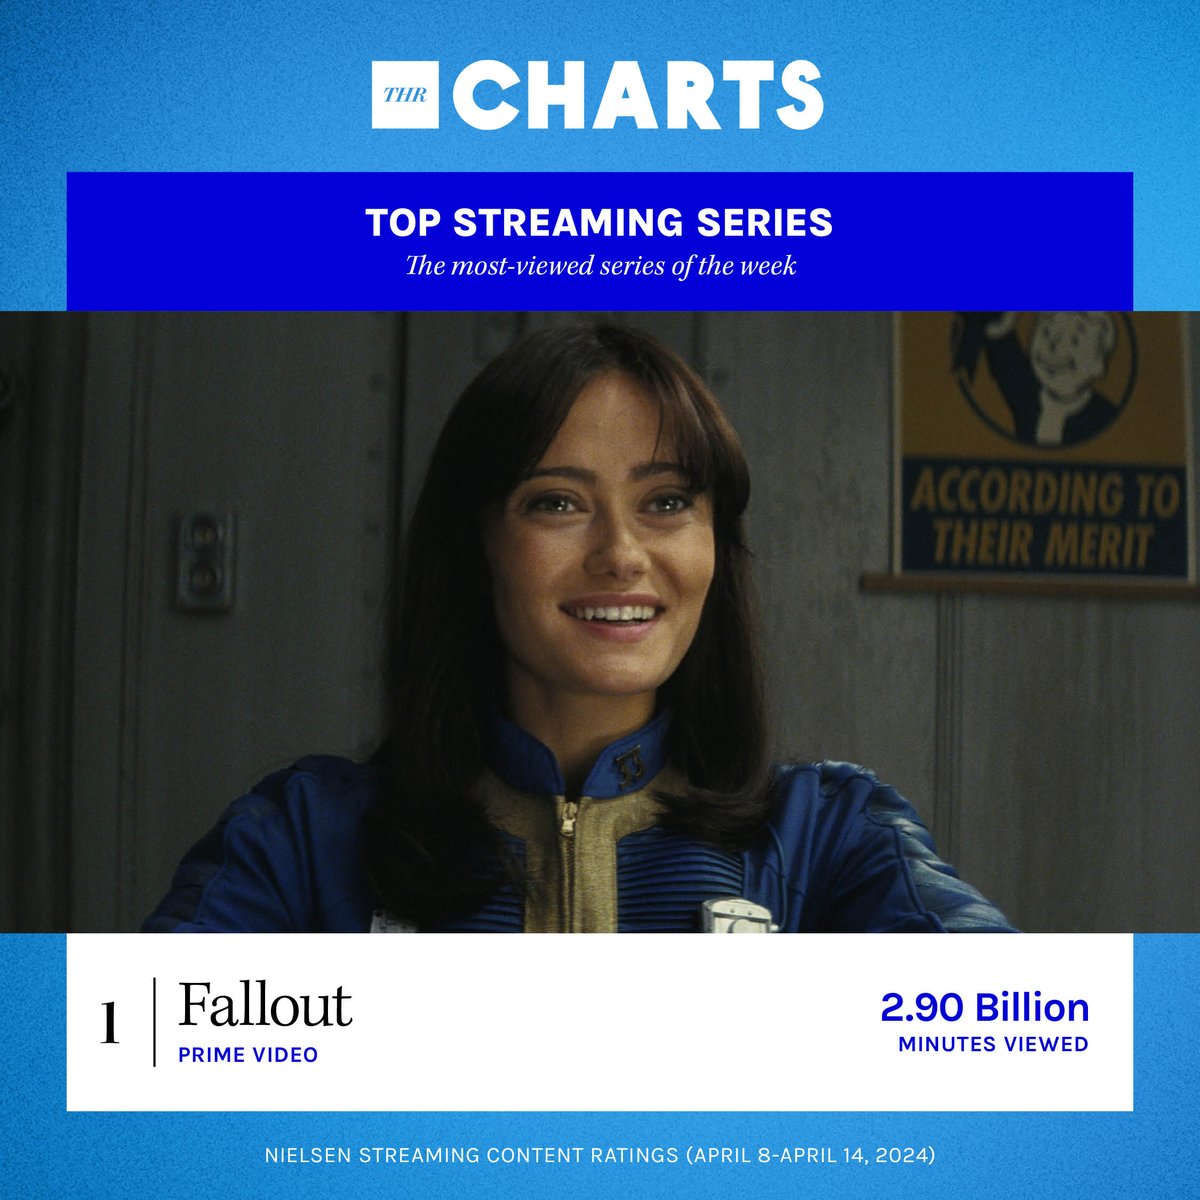 #THRCharts: #Fallout recorded 2.9 billion minutes of viewing time in the U.S. over its first five days. That’s far and away the best opening for a series Prime Video: thr.cm/Yj9pP4t